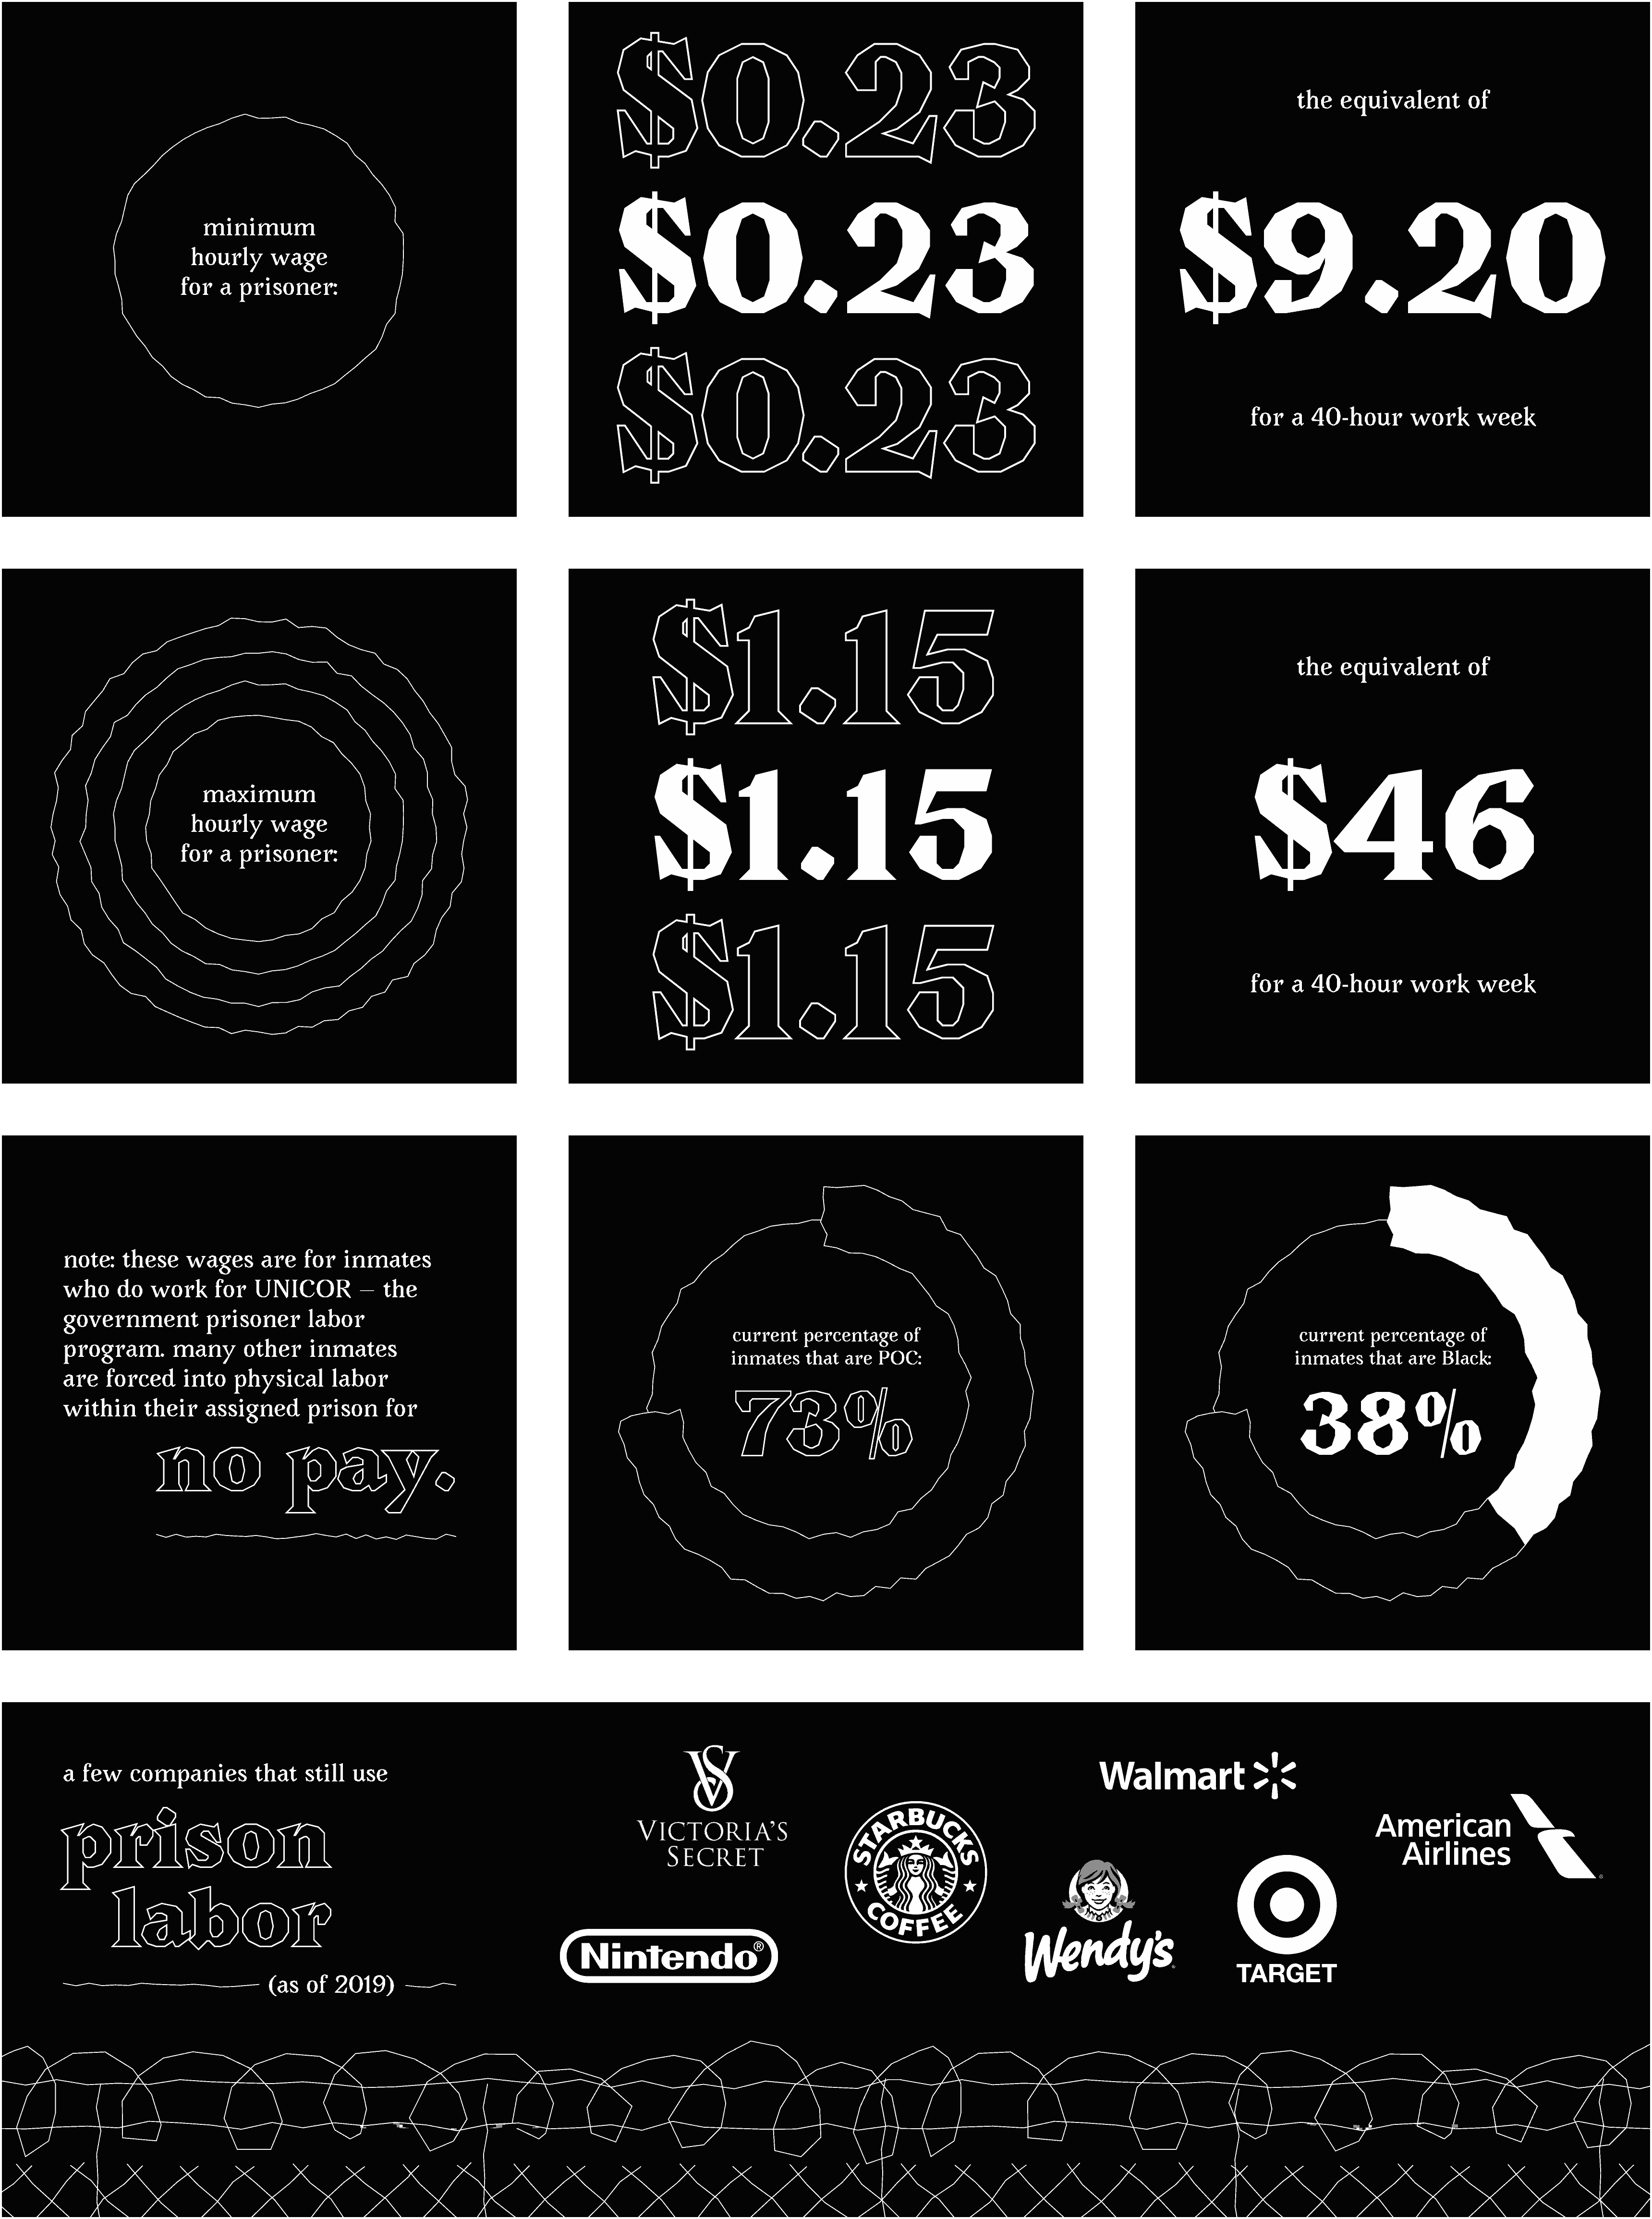 A grid of screenshots from the animation. UNICOR prisoners make a minimum hourly wage of $0.23 and a maximum of $1.15. 73% of inmates are people of color. Companies still using prison labor include Nintendo, Victoria's Secret, Starbucks, Wendy's, Walmart, Target, and American Airlines.